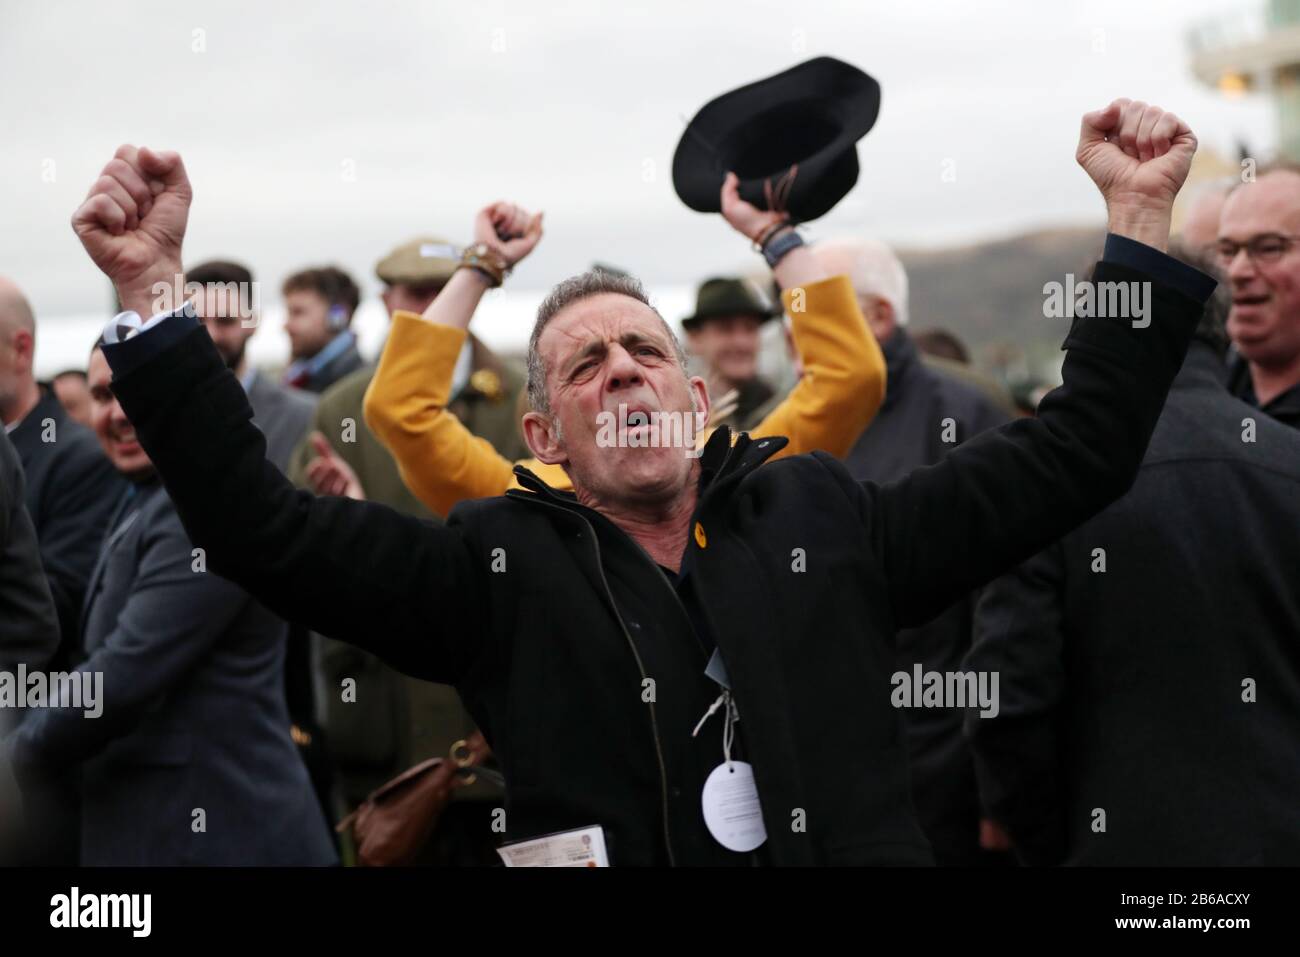 A spectator celebrates after Imperial Aura and jockey David Bass celebrate won the Northern Trust Company Novices' Handicap Chase during day one of the Cheltenham Festival at Cheltenham Racecourse, Cheltenham. Stock Photo